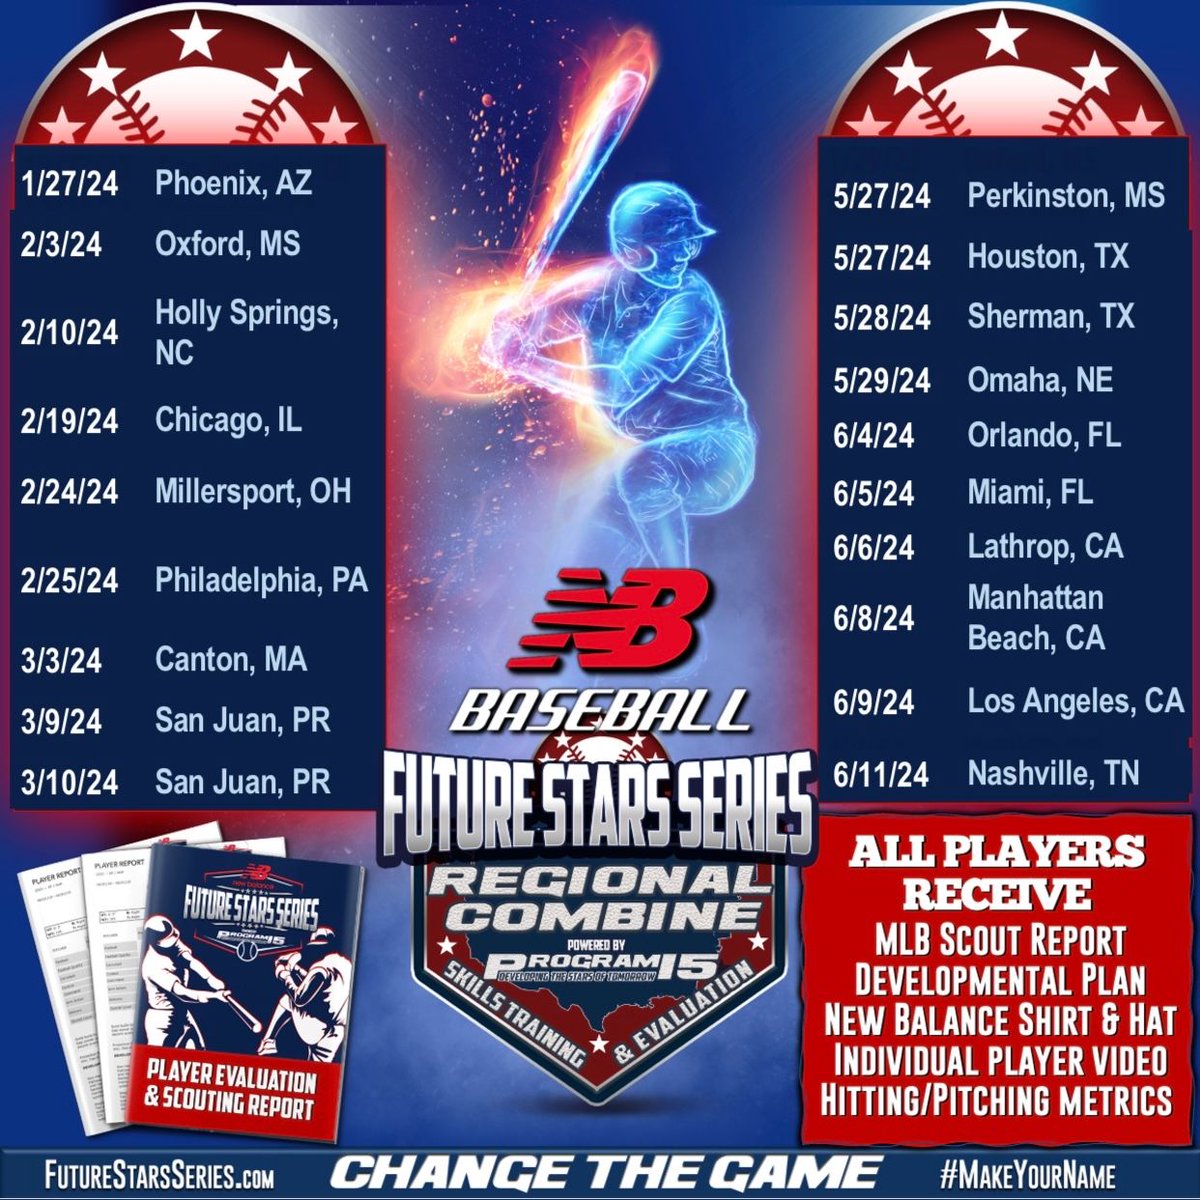 🚨 Regional Combine Schedule 🚨 We hit the road starting in Phoenix on Jan. 27 to see who will move on to the national stage at Vanderbilt this summer. Registration/Invite info ➡️ buff.ly/3Jjmtns @NB_Baseball #WeGotNow